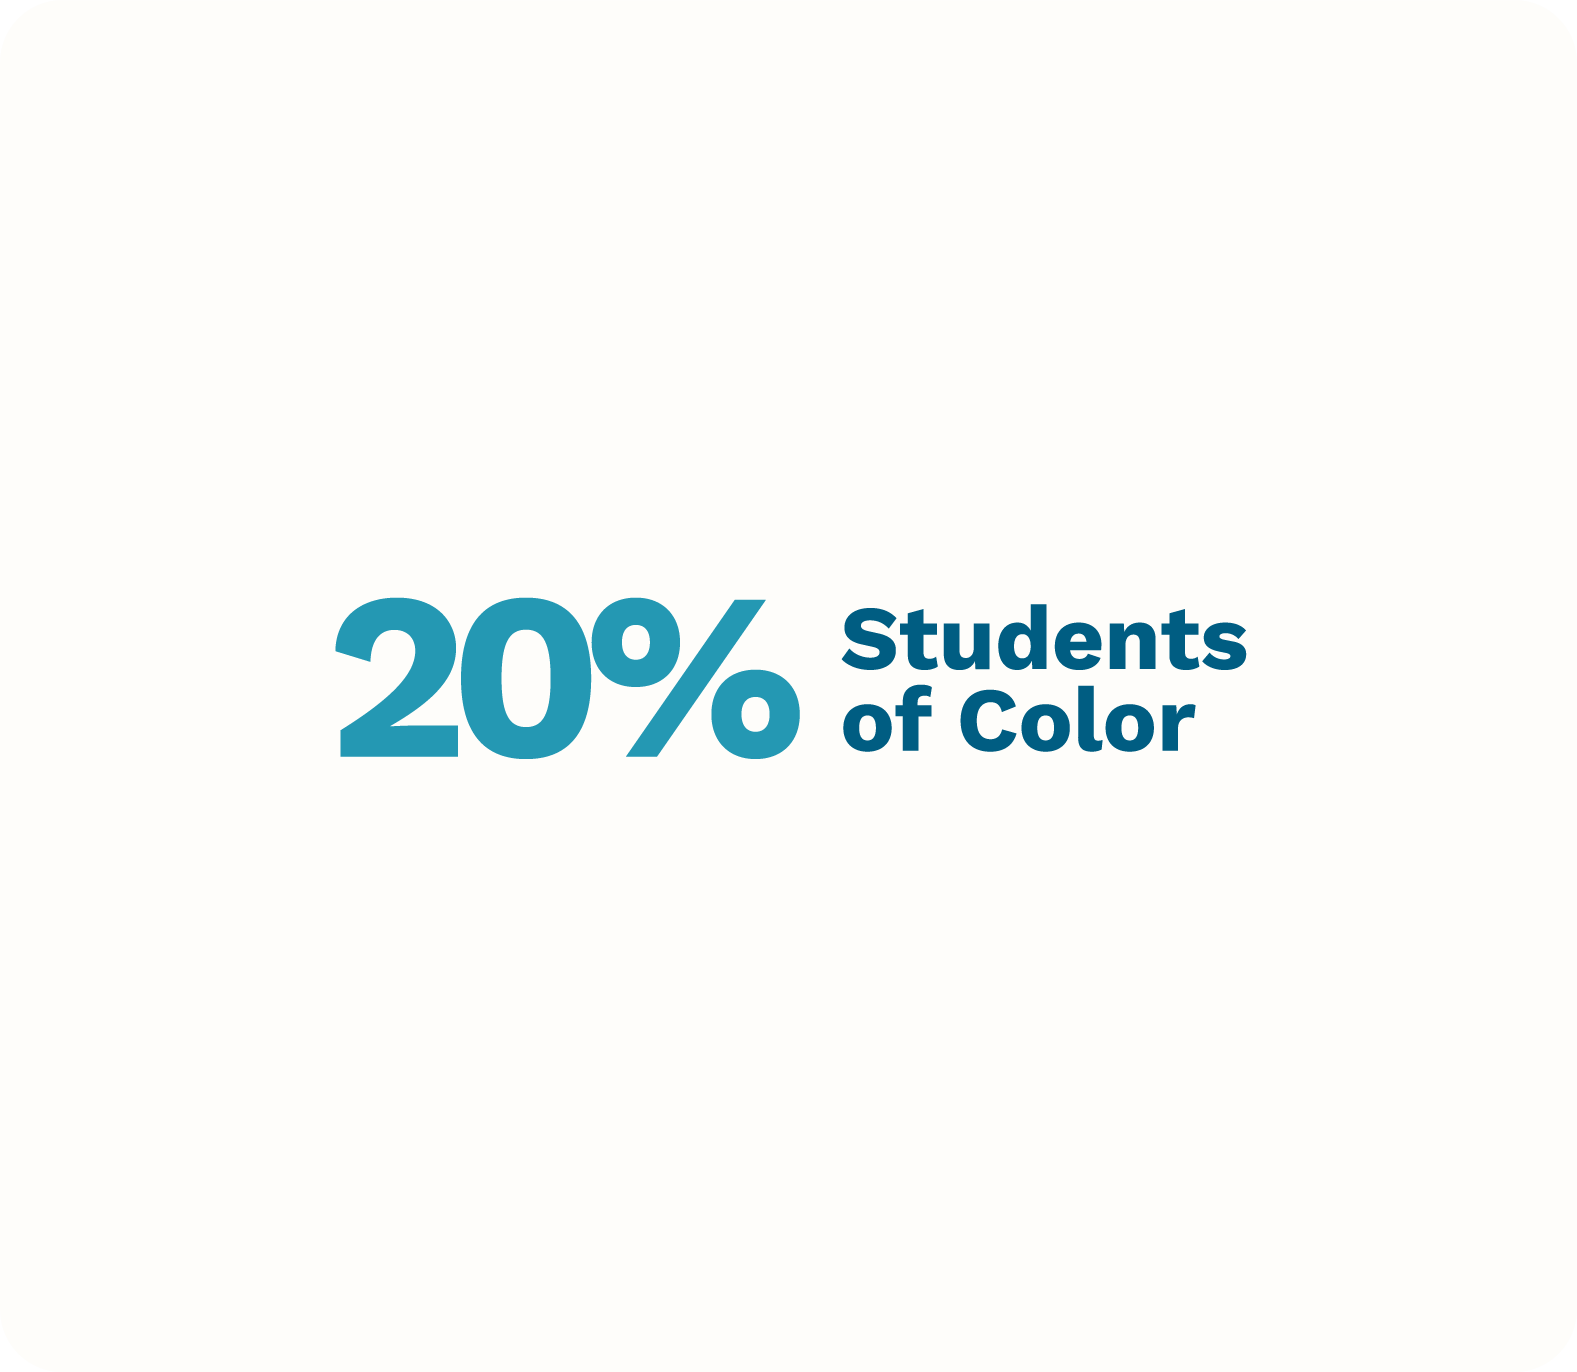 Proof point displaying that there are 20% students of color